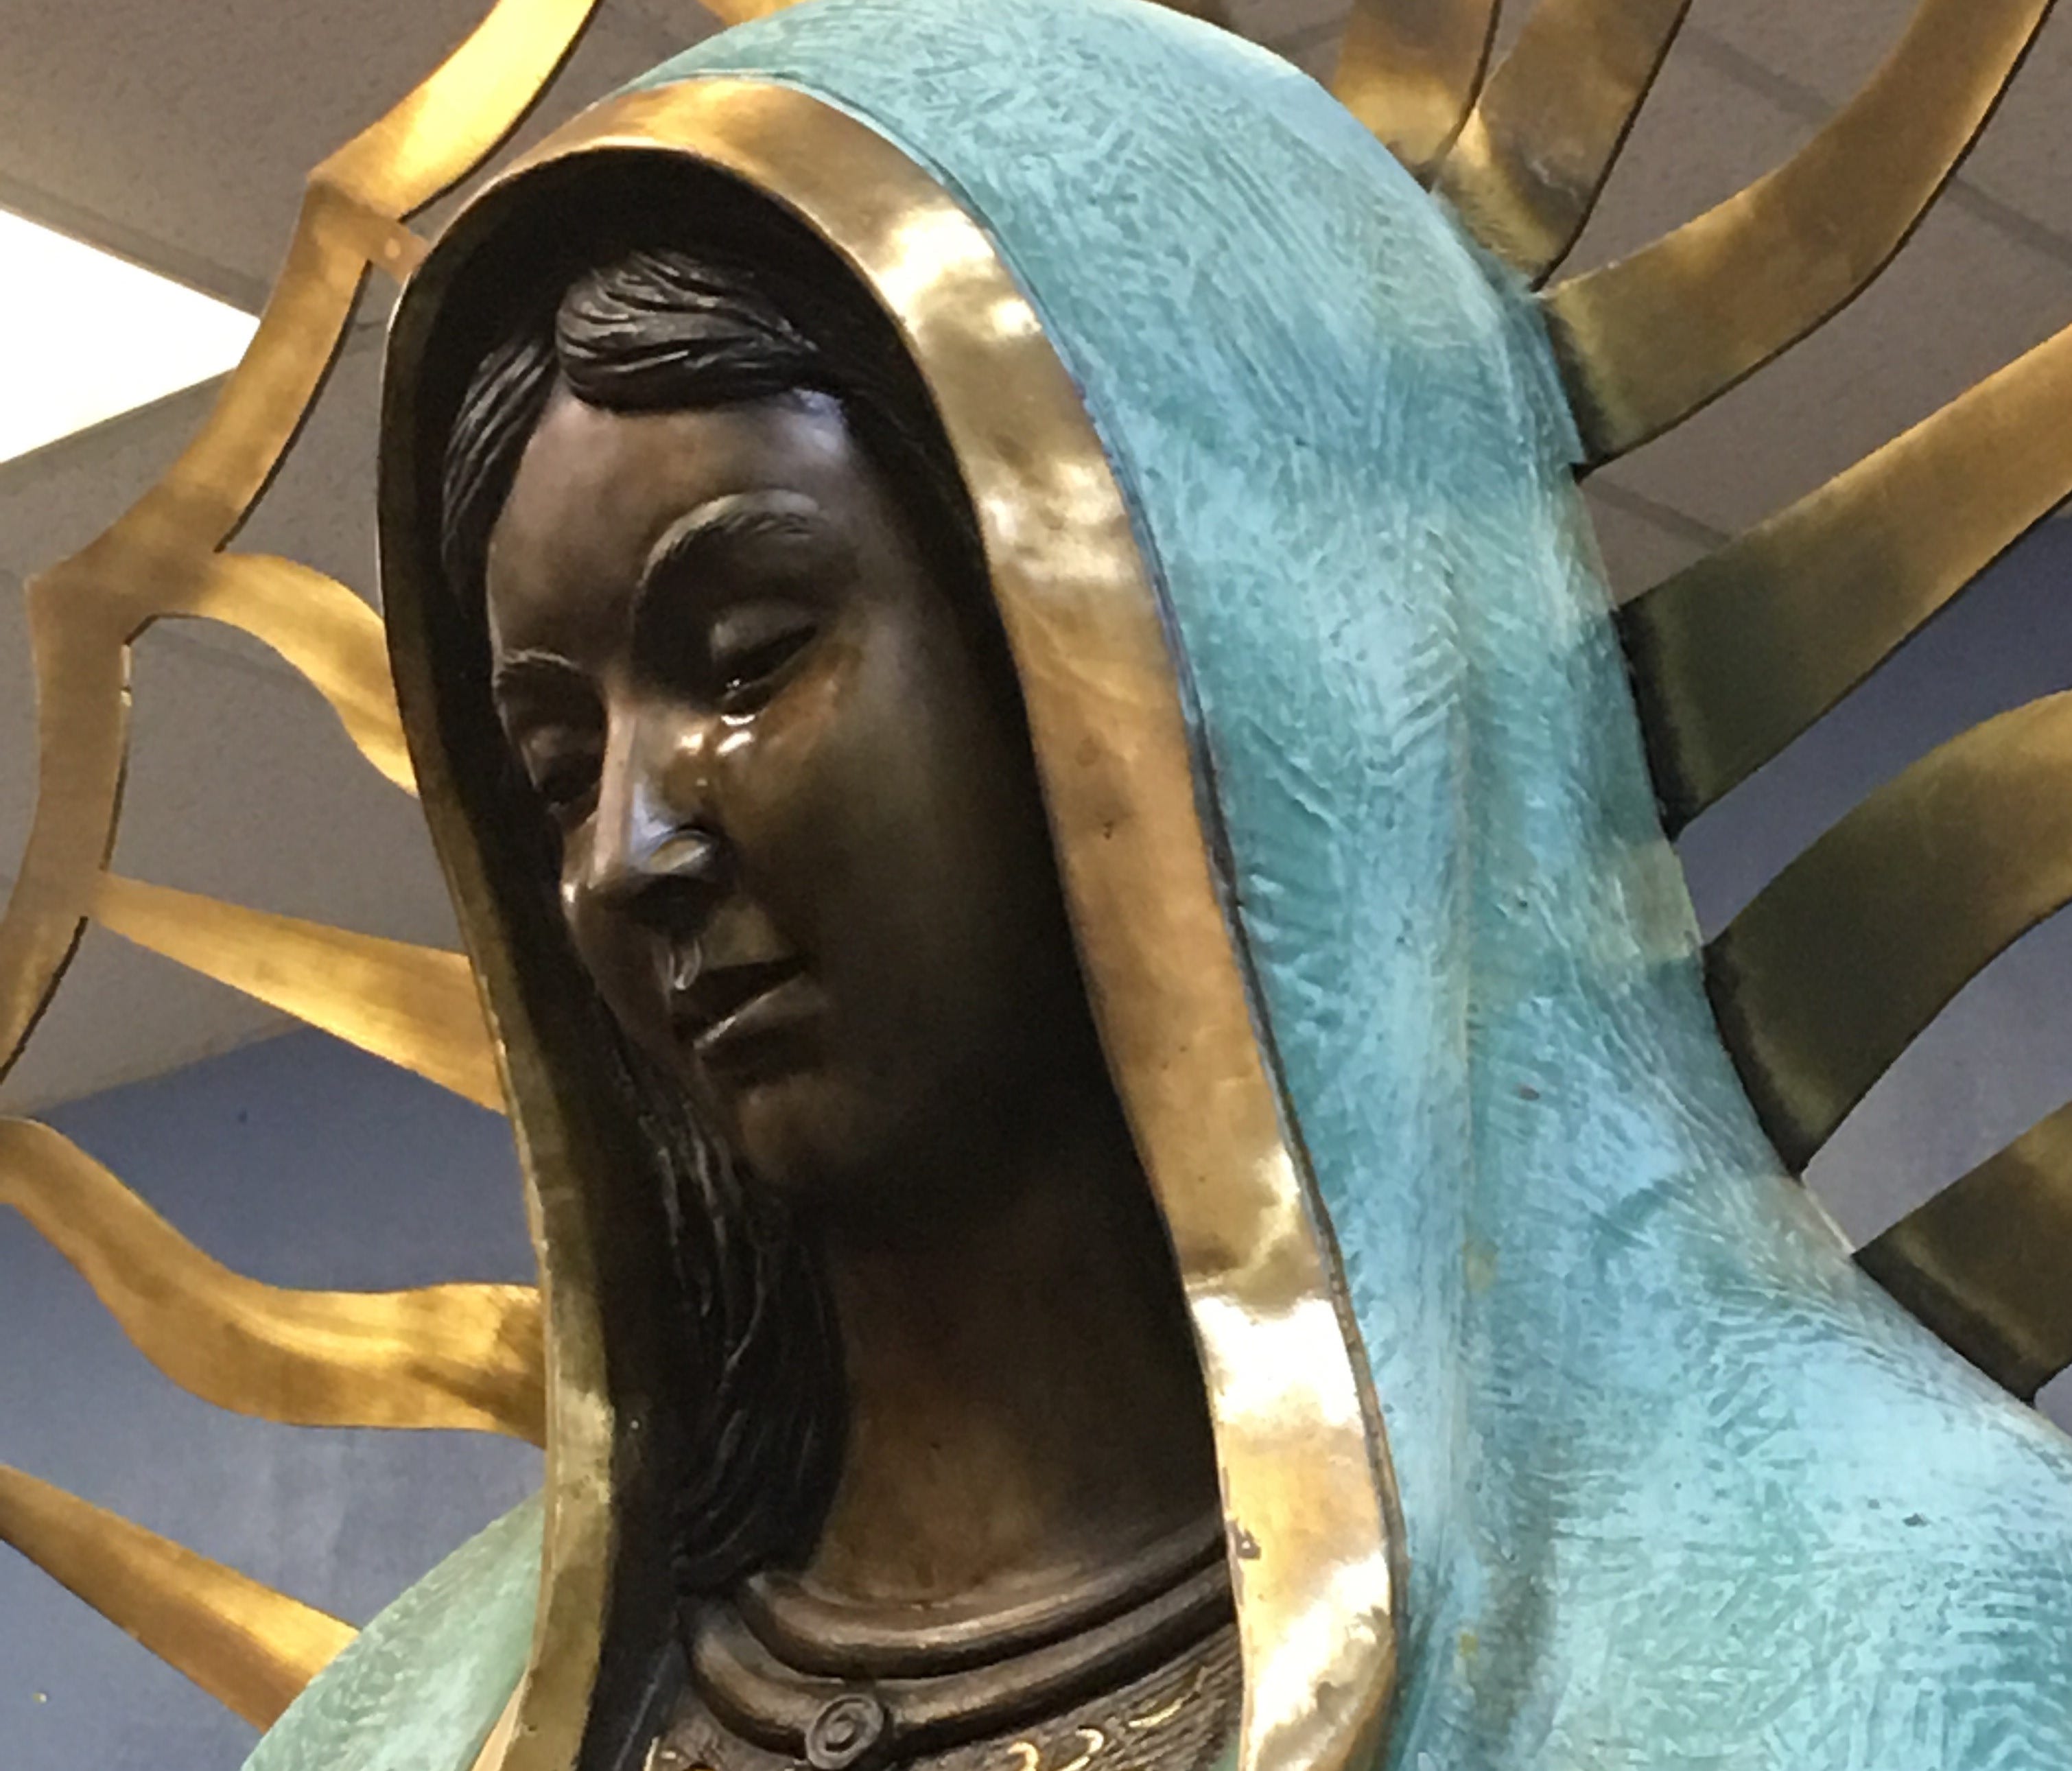 The statue of the Virgin Mary inside Our Lady of Guadalupe Church Sunday shows signs of weeping from her eyes. Parishioners witnessed the statue crying during the church's noon mass.